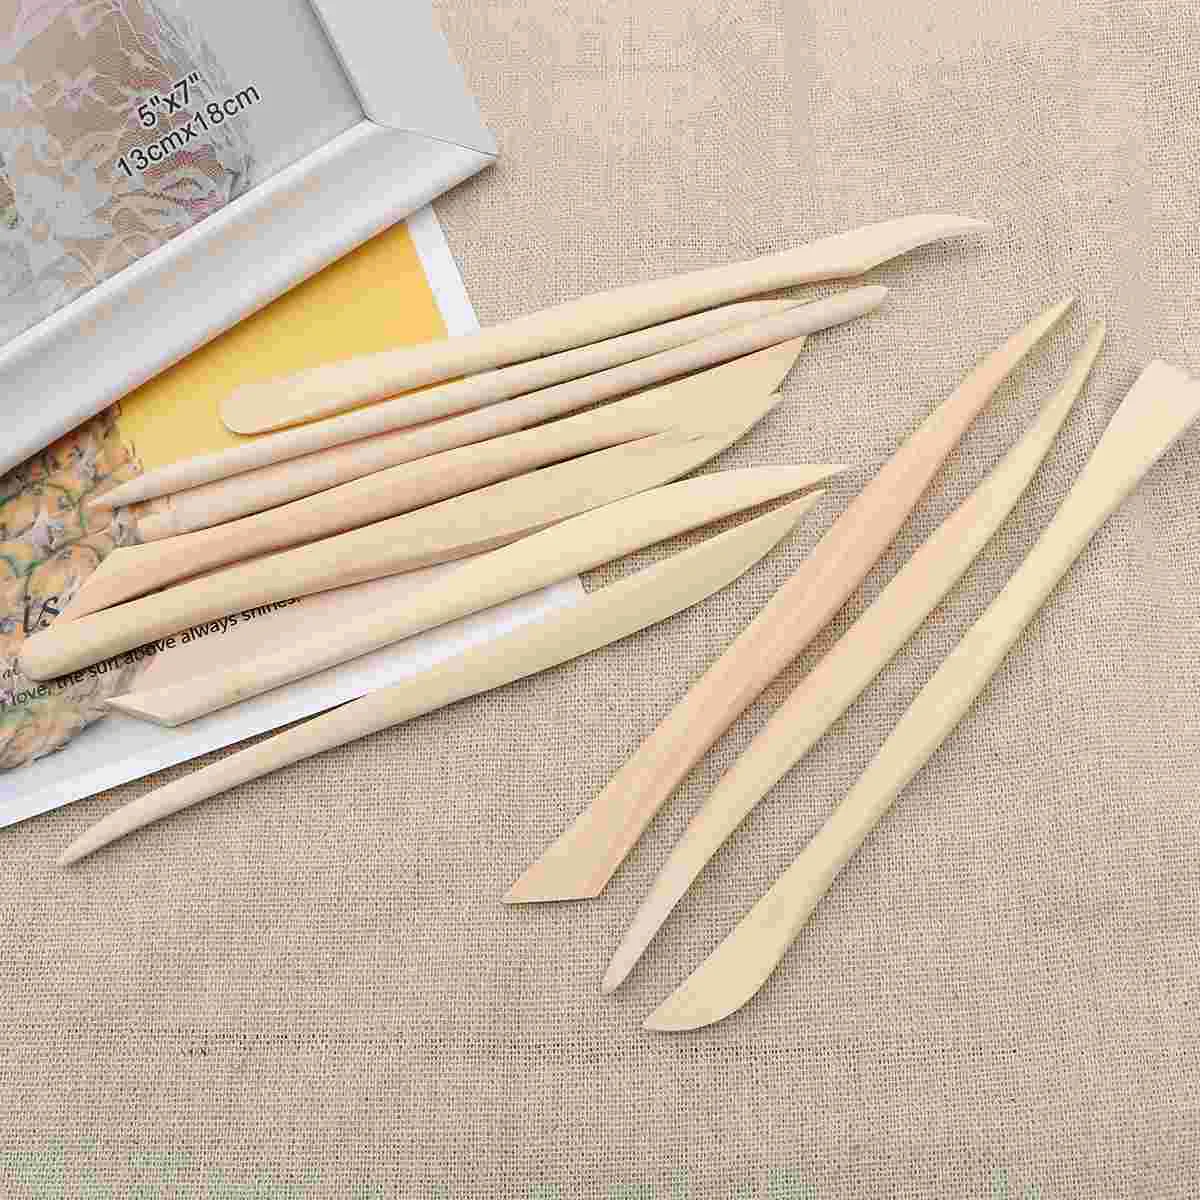 

Clay Tools Sculpting Polymer Wooden Pottery Kitdry Air Sculpt Apoxie Non Hardening Modeling Milliputset Molding Sculpey Carving